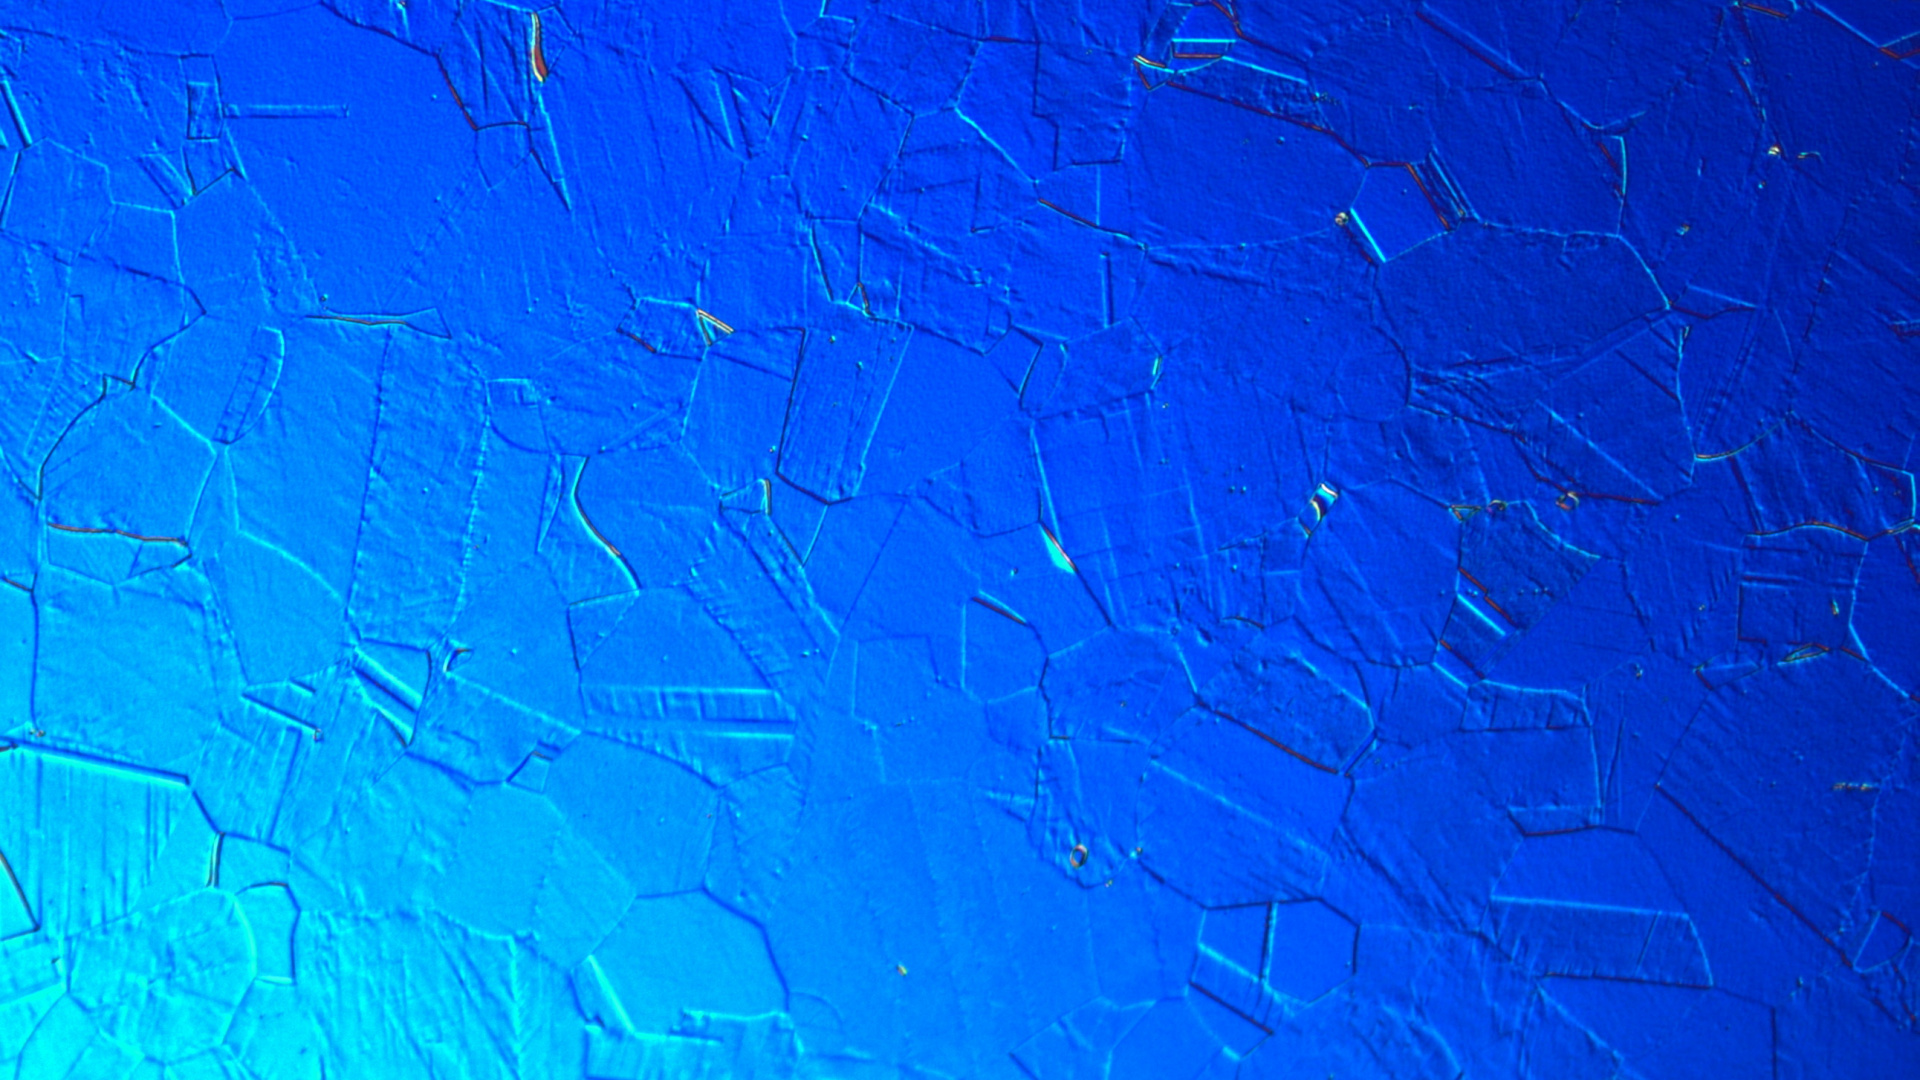 Blue and White Painted Wall. Wallpaper in 1920x1080 Resolution